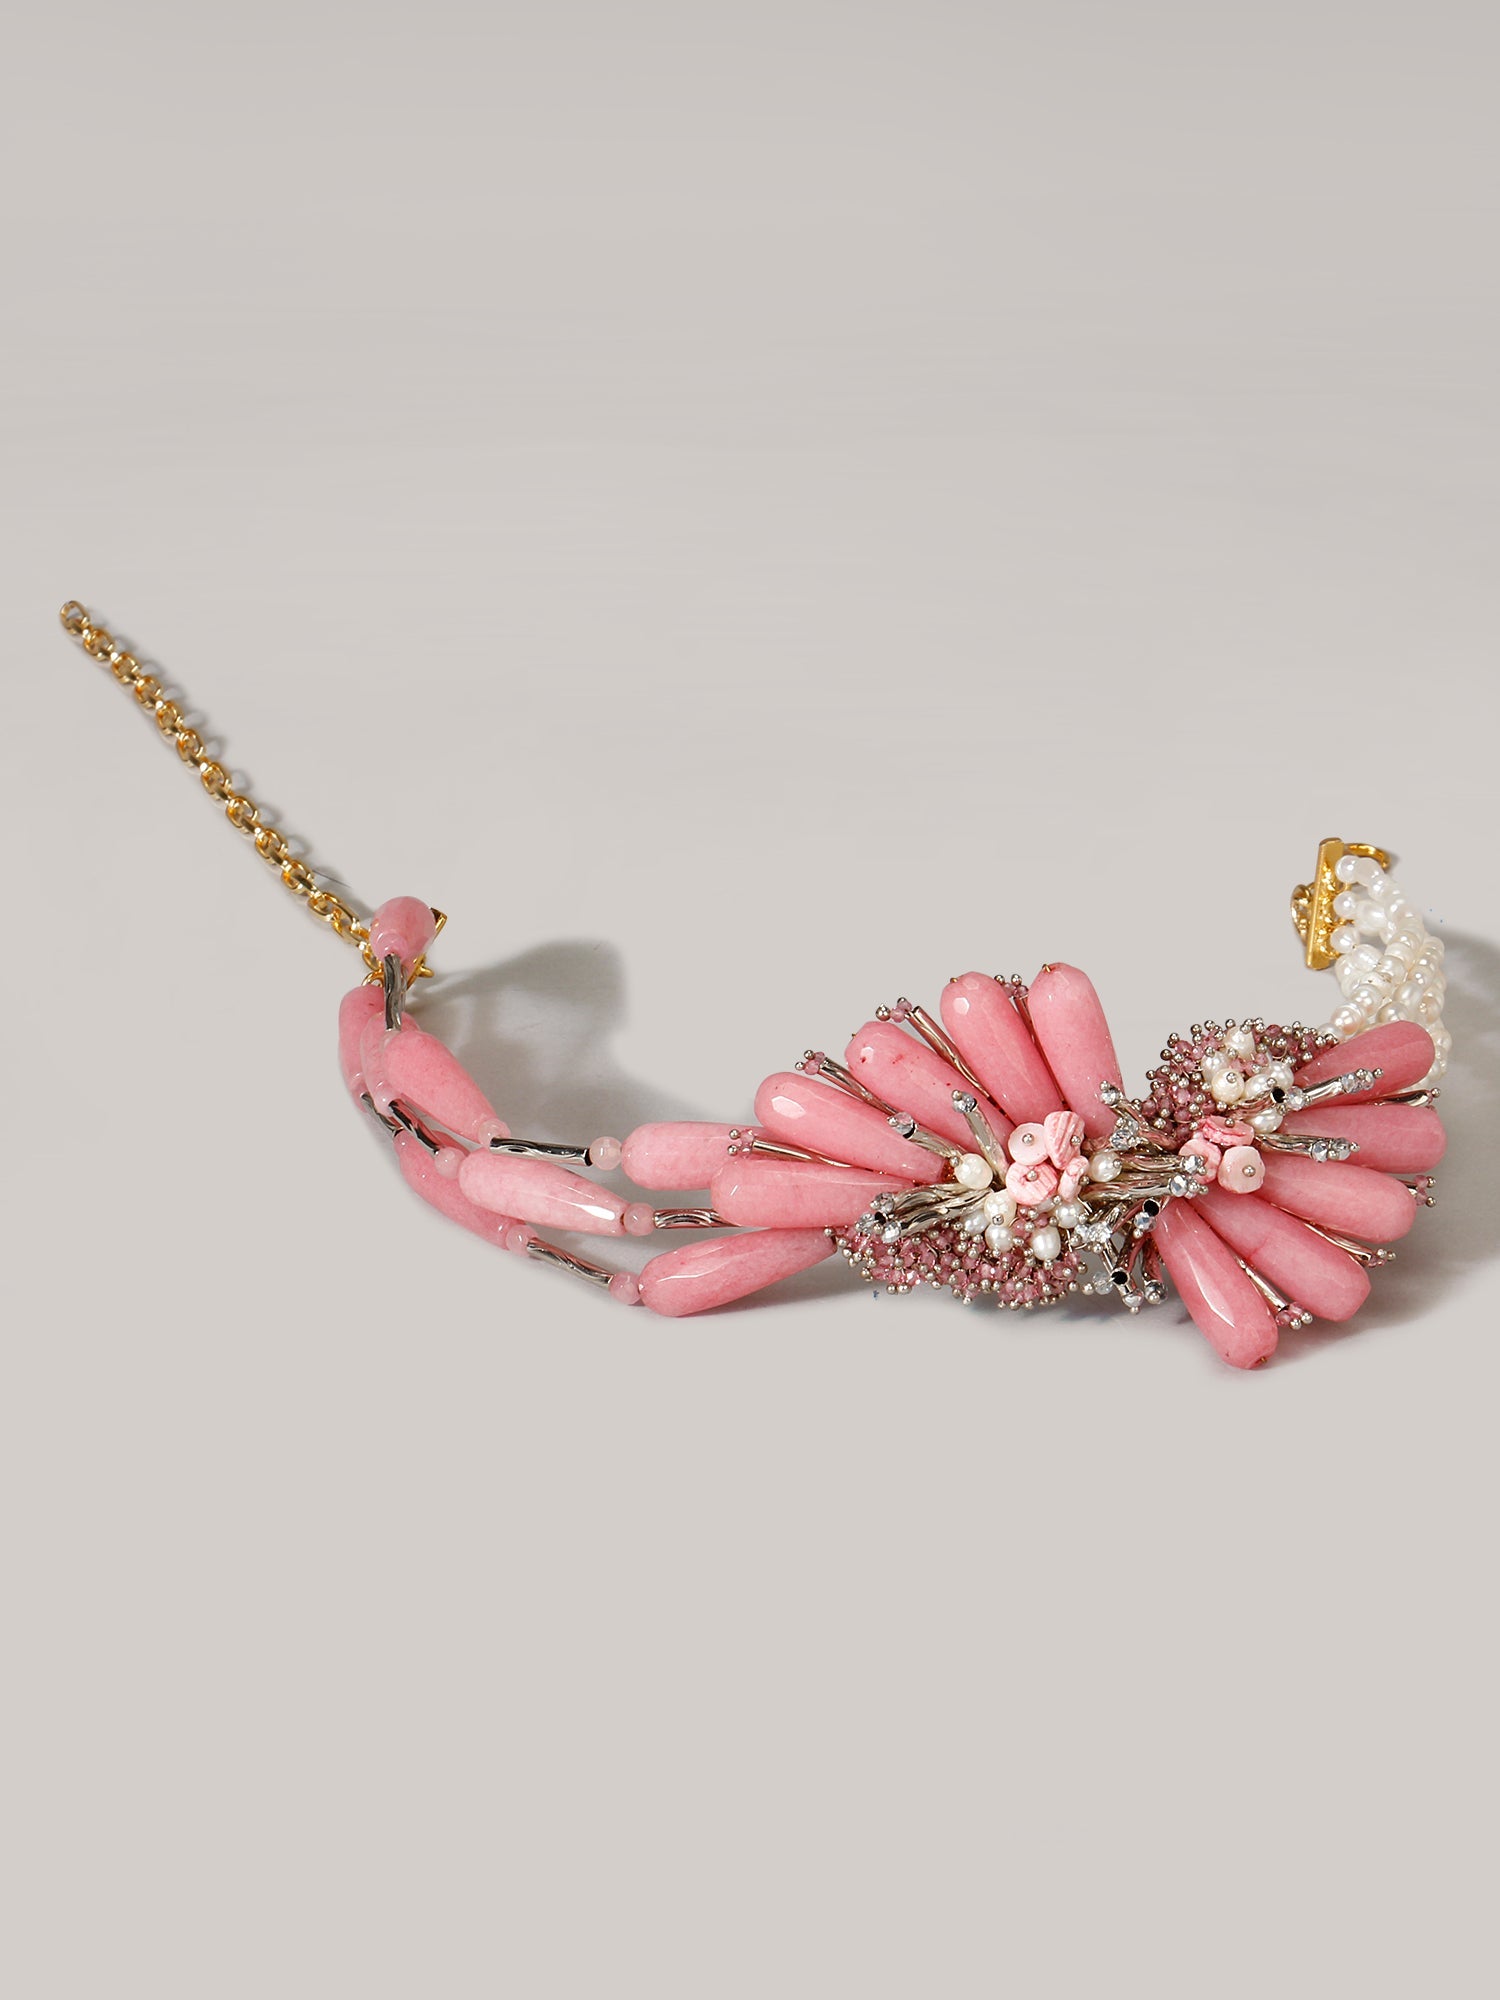 PHILODENDRON PINK CHOKER - House of Doro